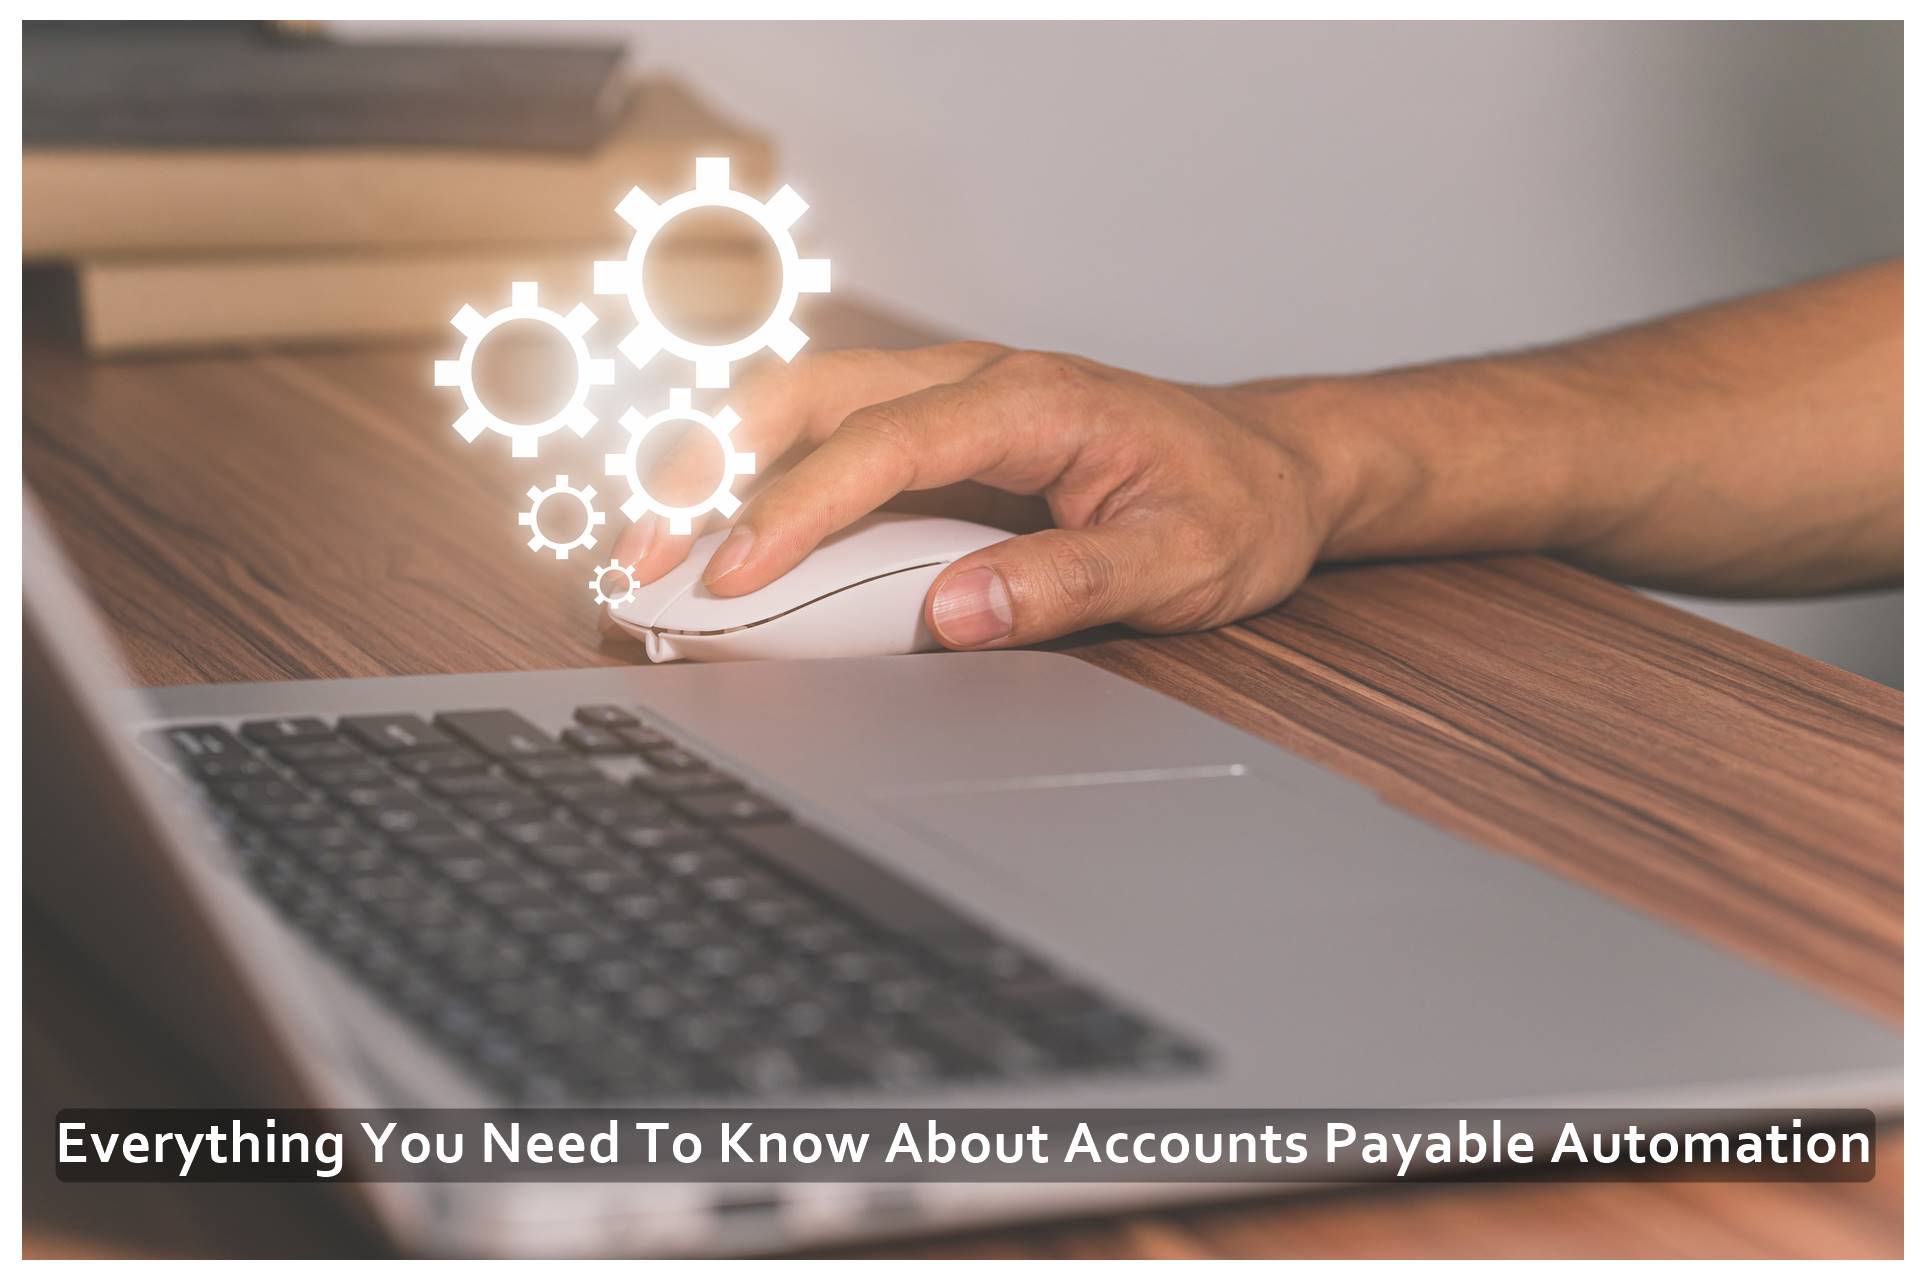 Everything You Need To Know About Accounts Payable Automation